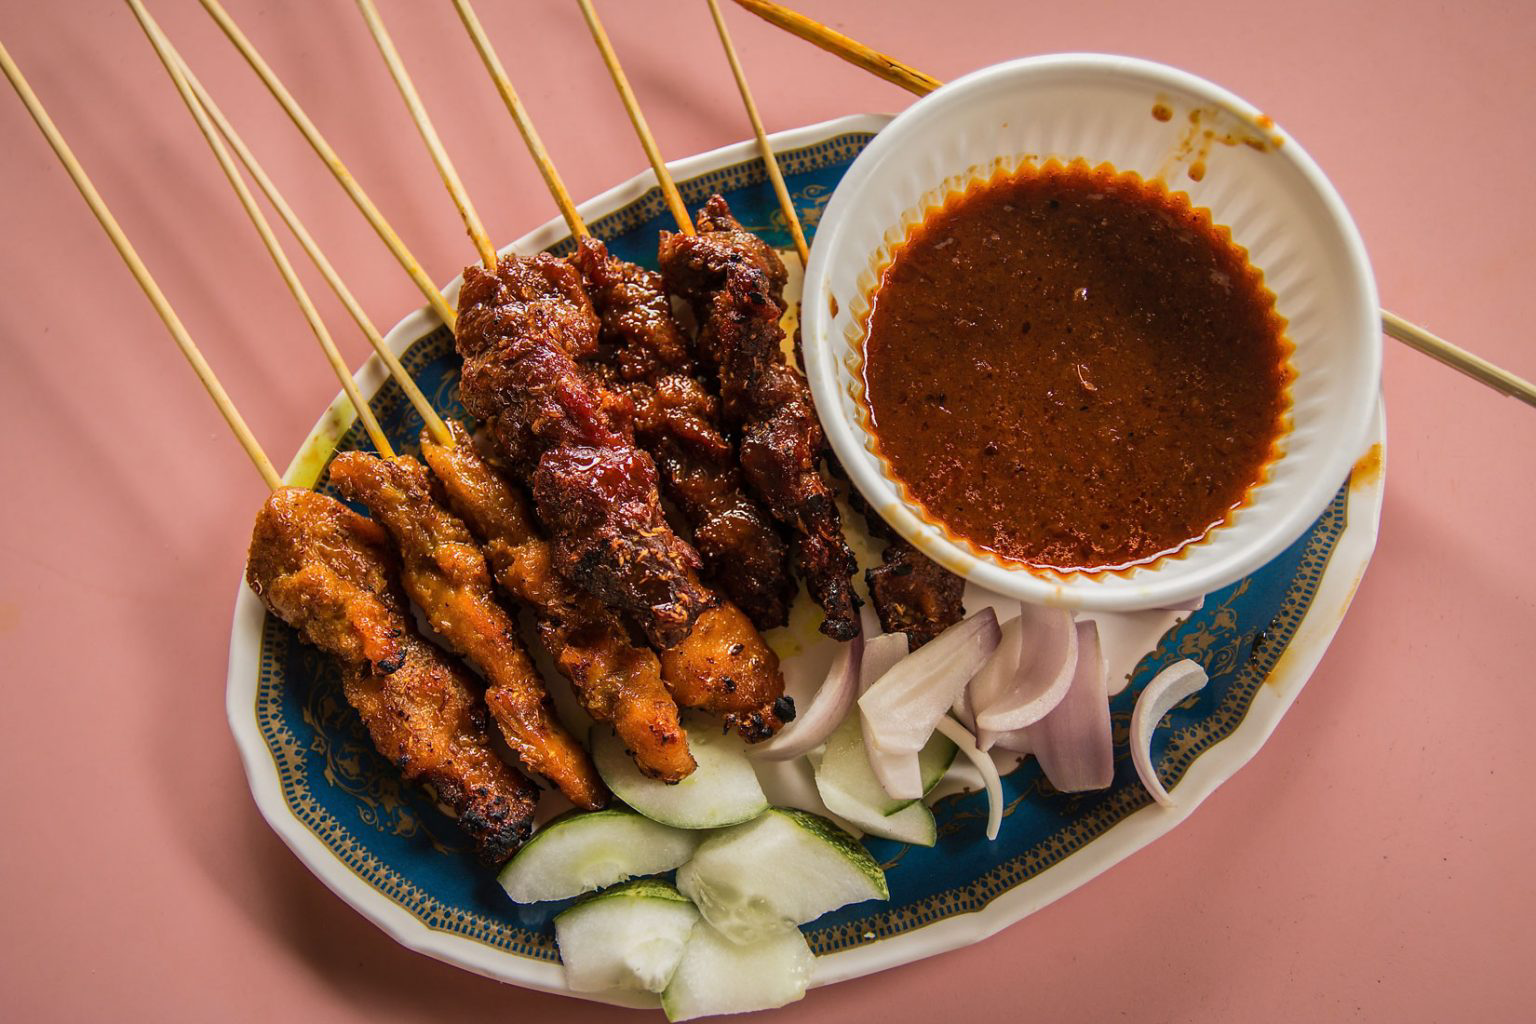 An ornate dish filled with Singaporean satay and a dish of peanut sauce.